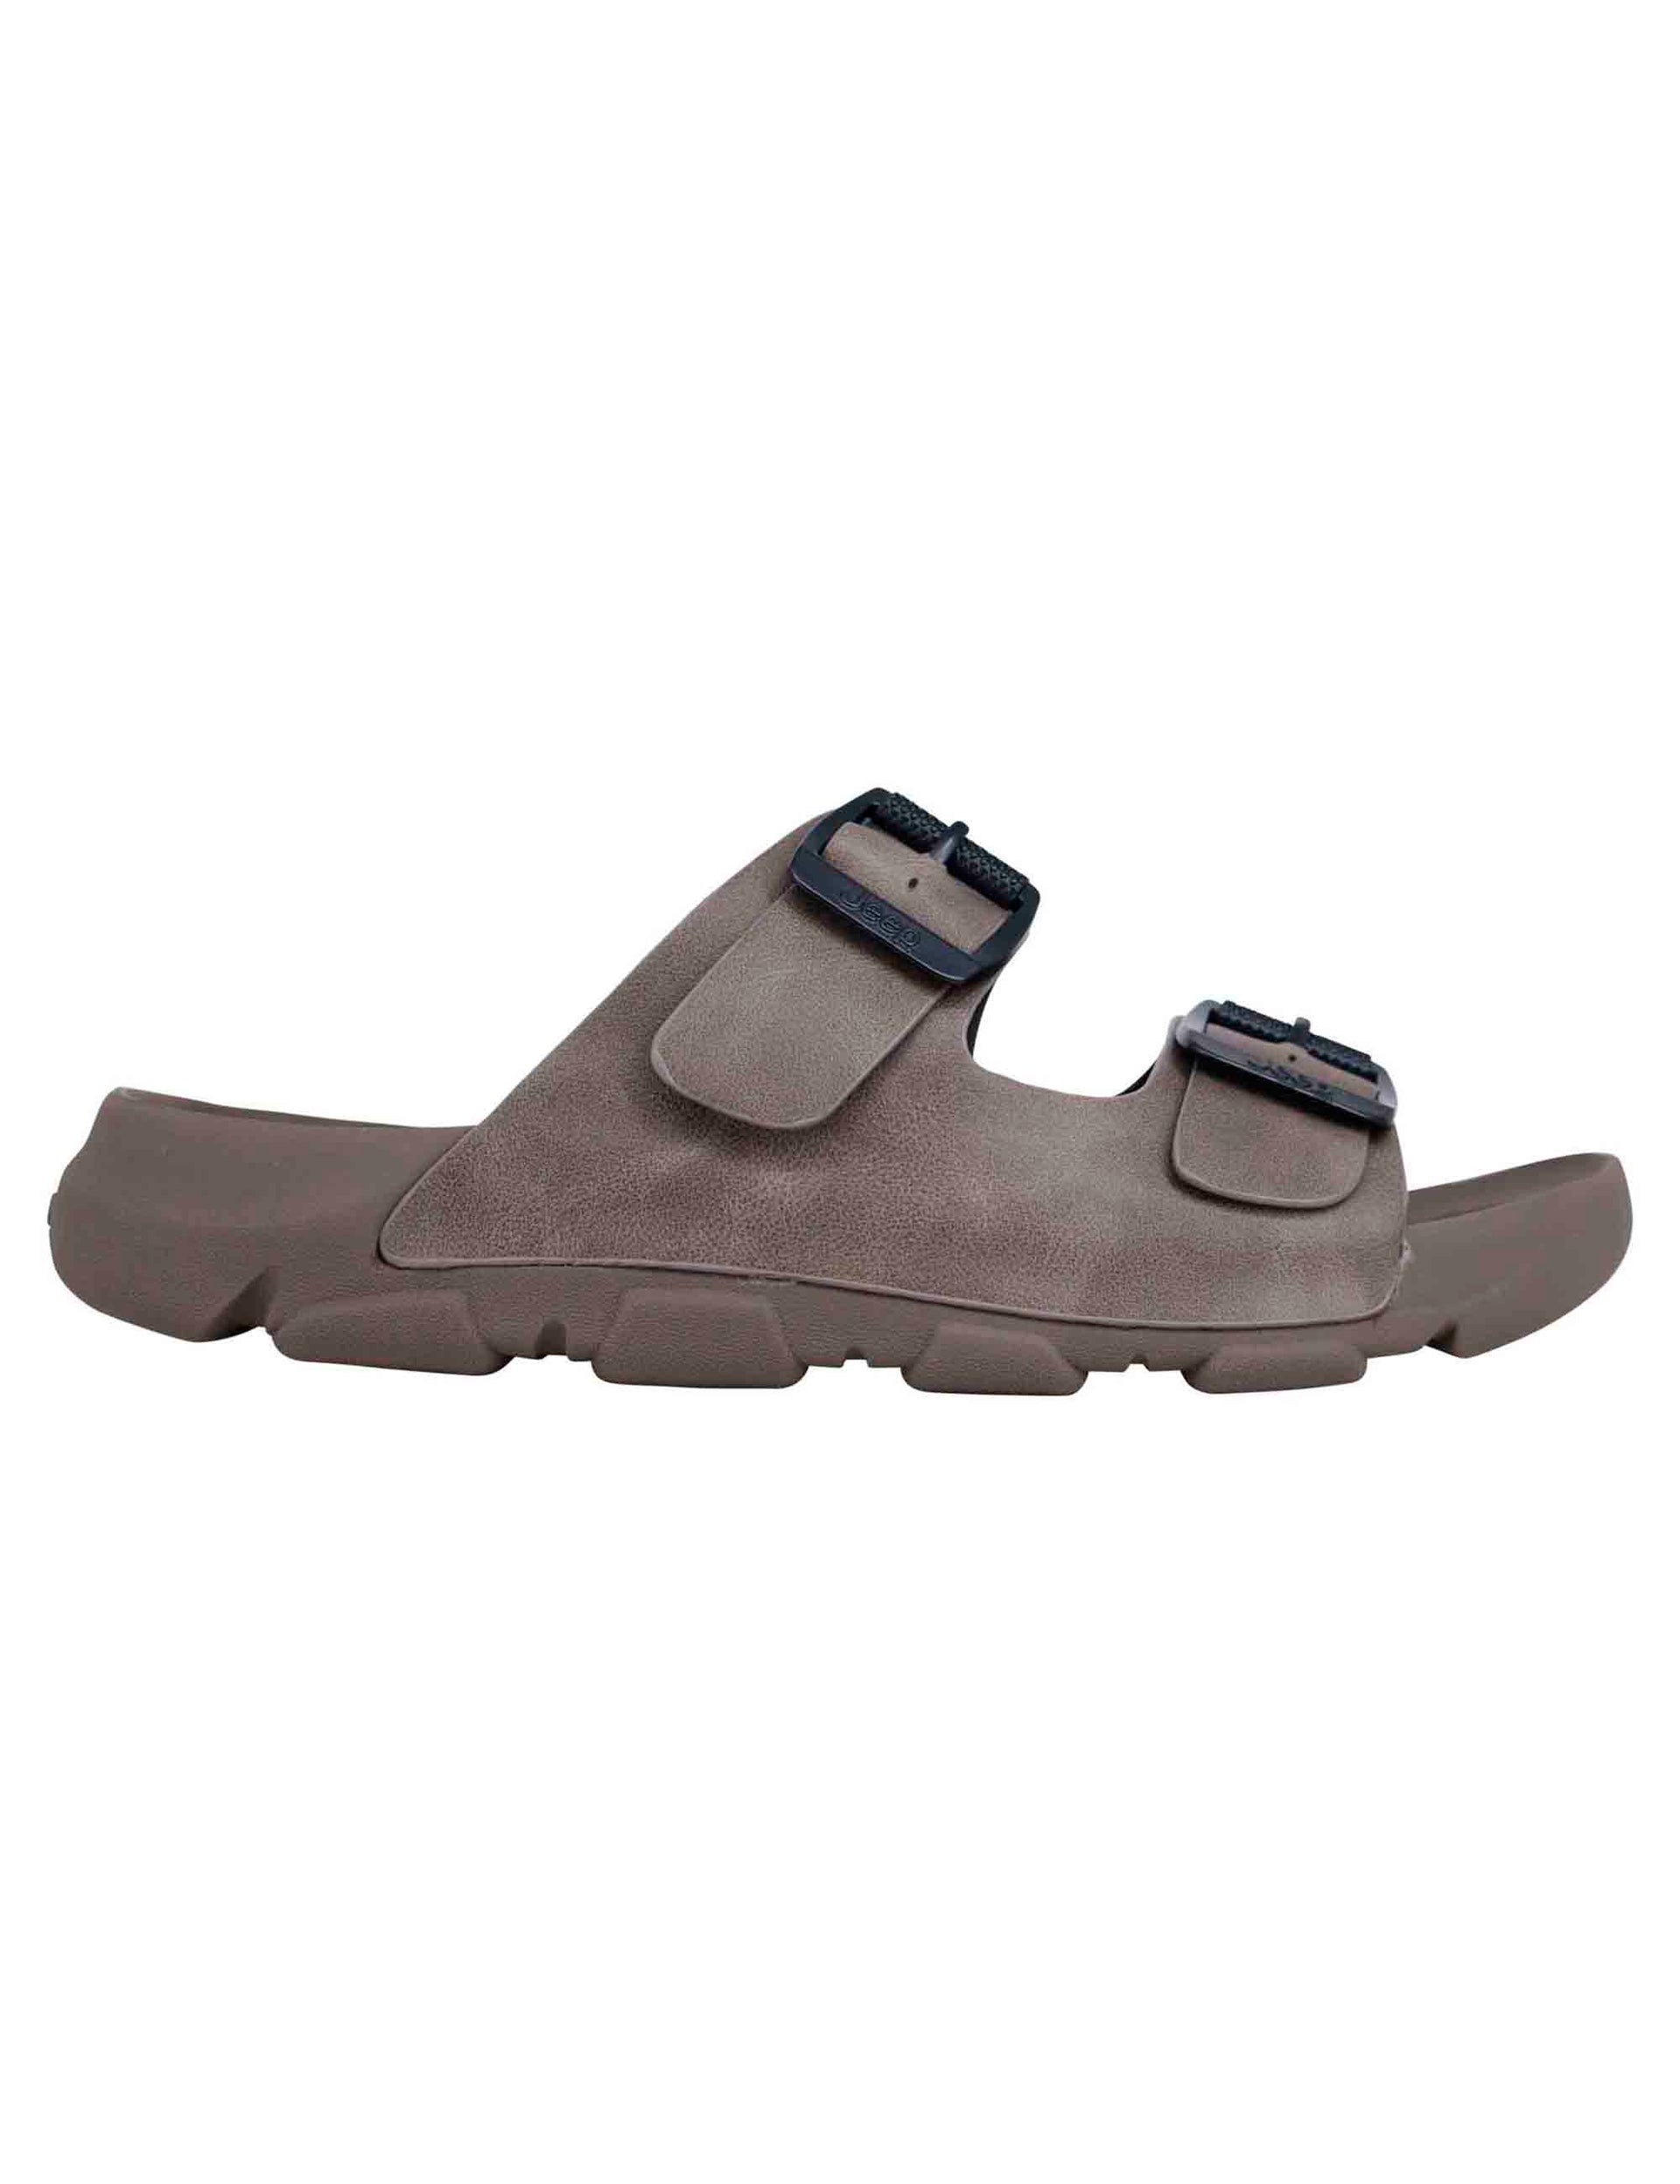 Daytona men's sandals in taupe leather